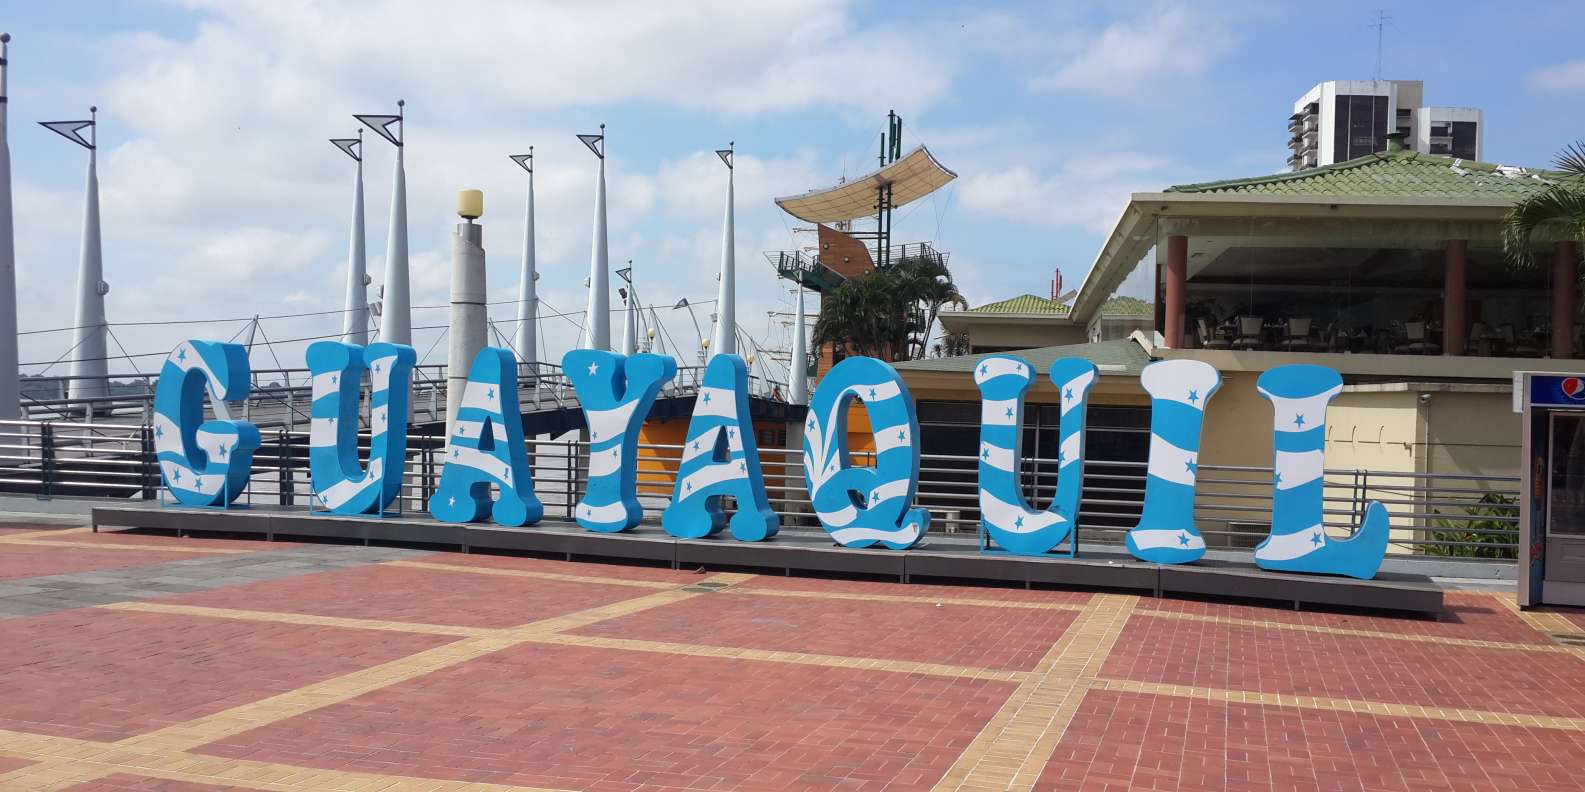 What to do in Guayaquil